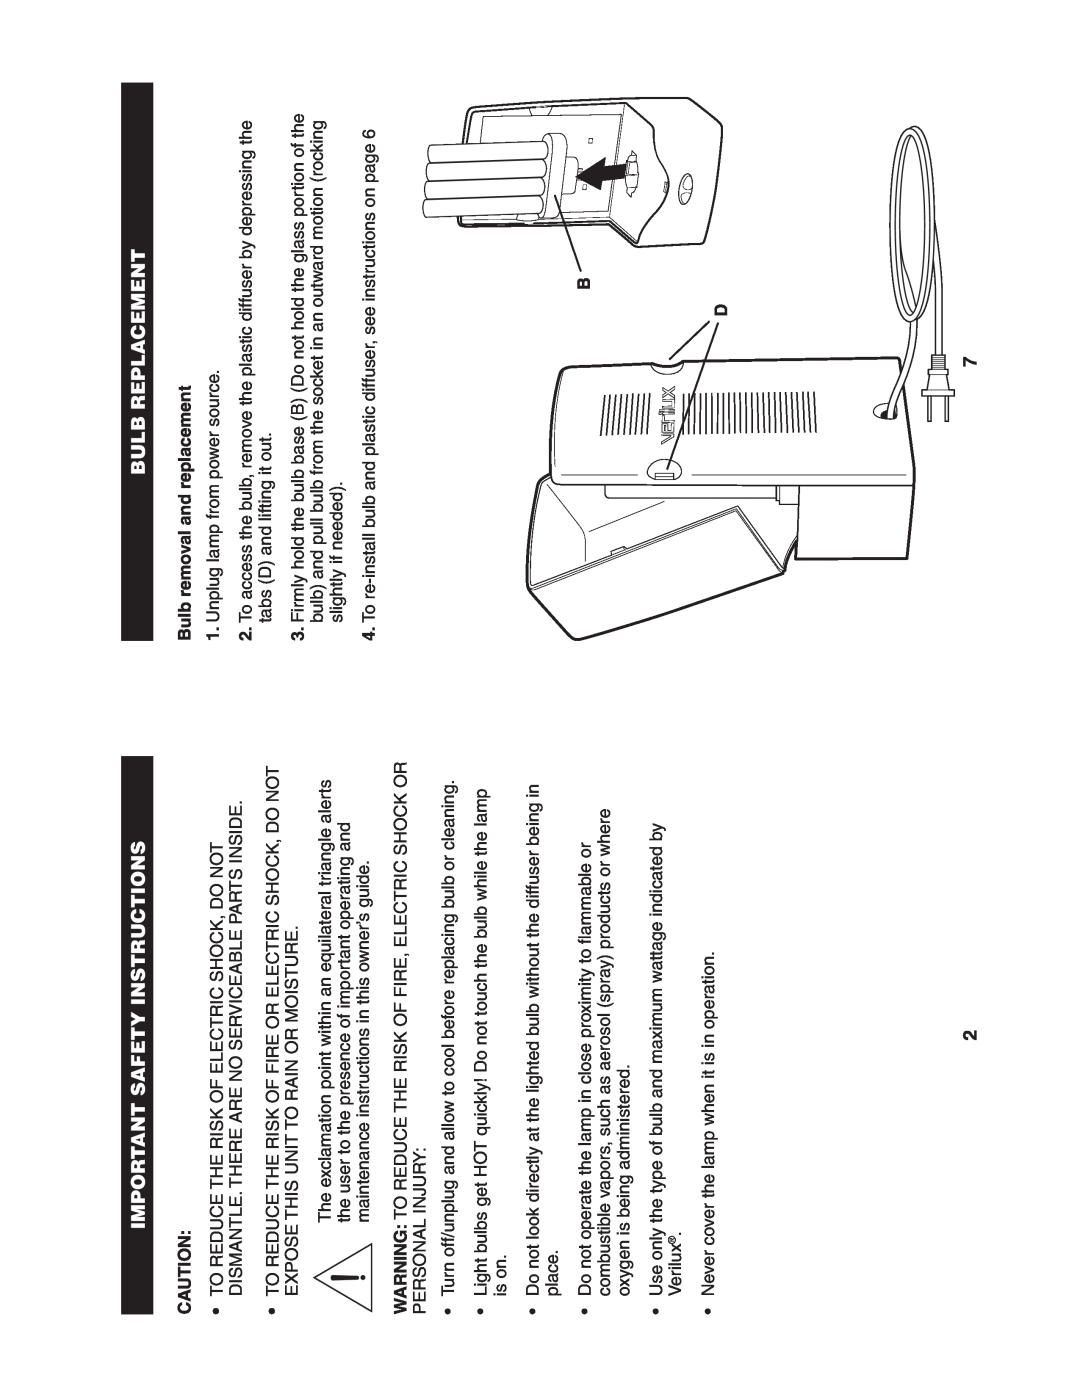 Verilux VT01 manual Important Safety Instructions, Bulb Replacement, Bulb removal and replacement 